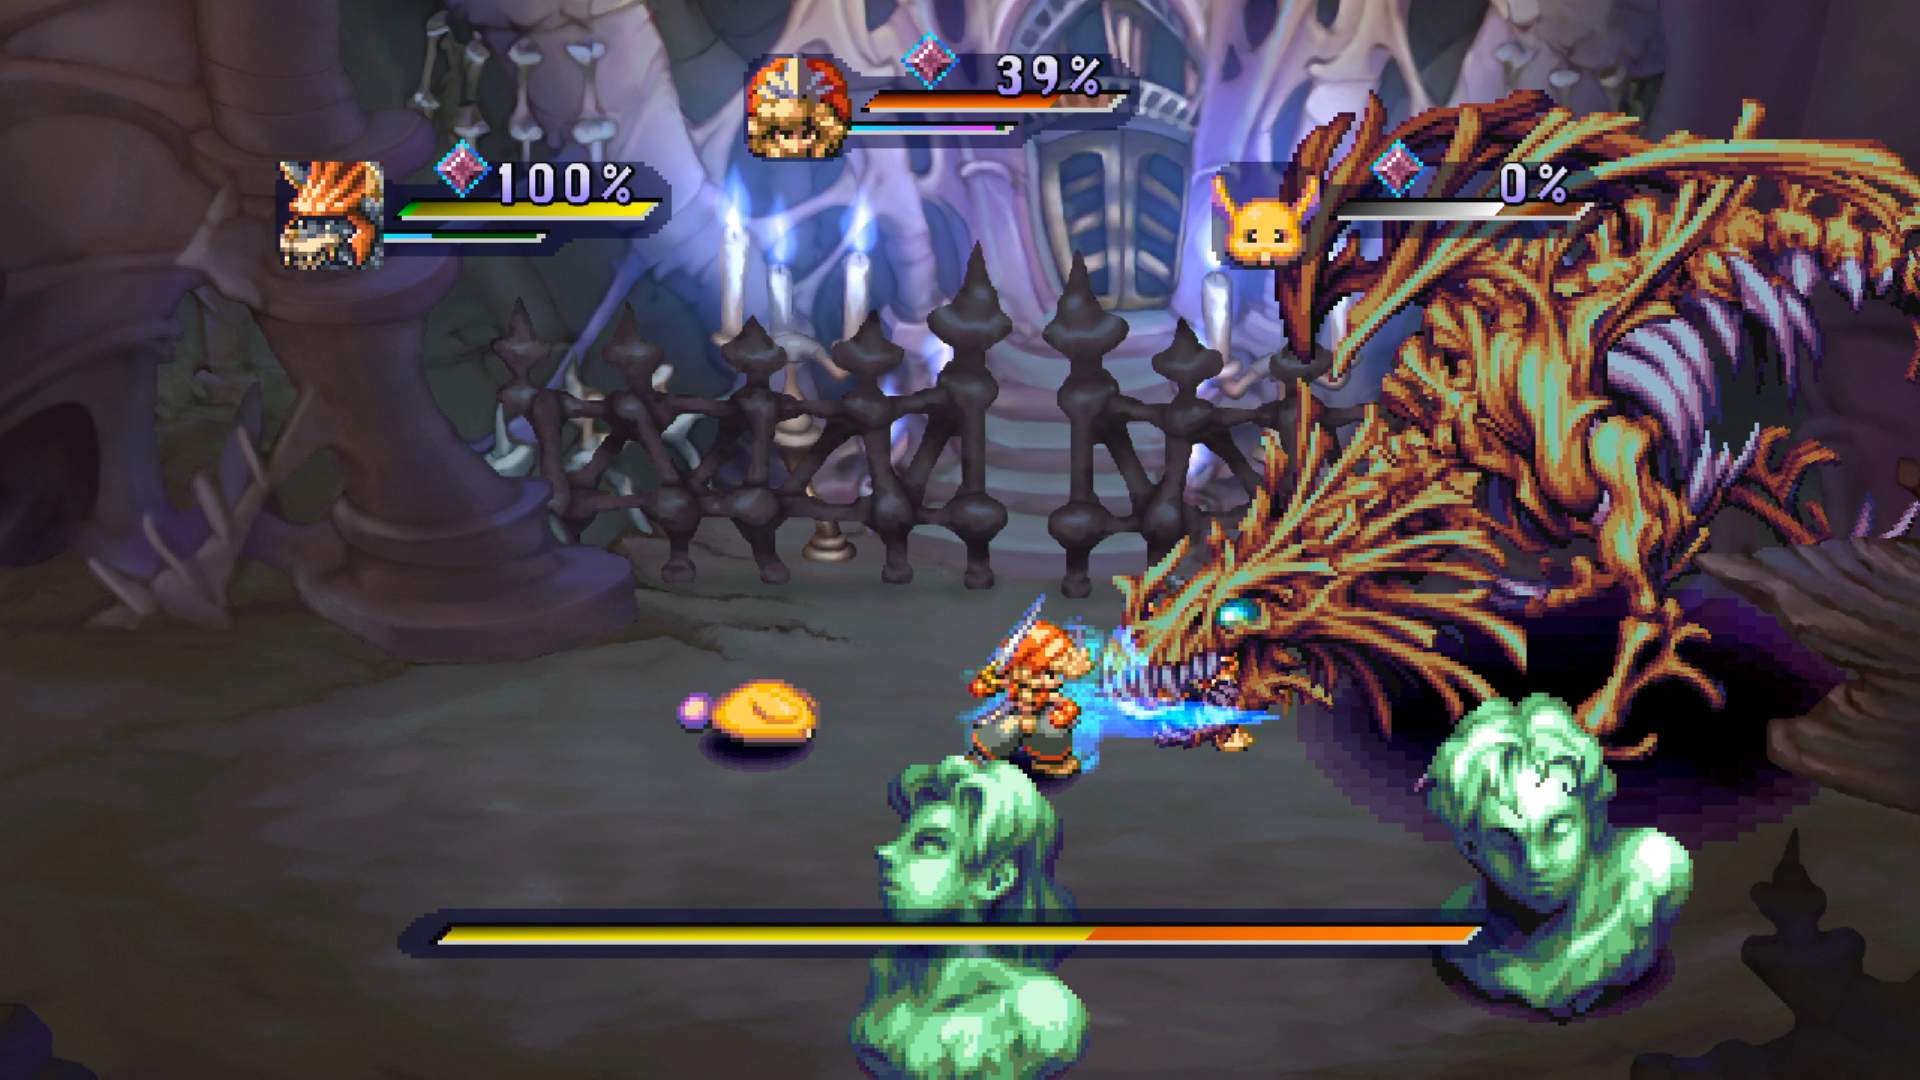 Legend of Mana in-game battle screen showing the party facing off against a large monster in a dungeon